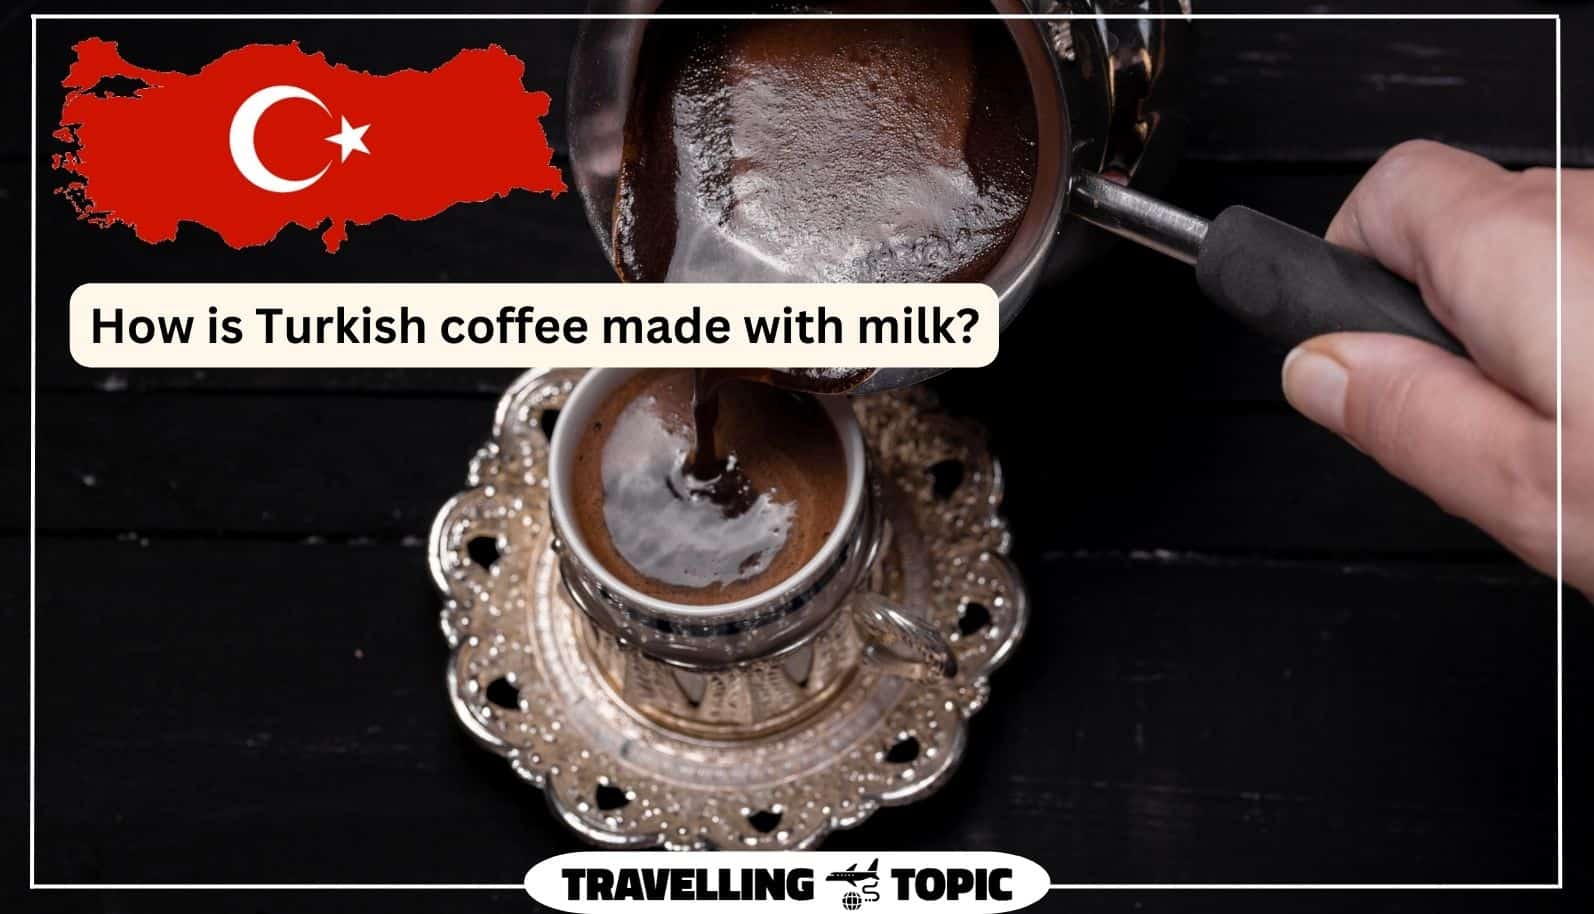 How is Turkish coffee made with milk